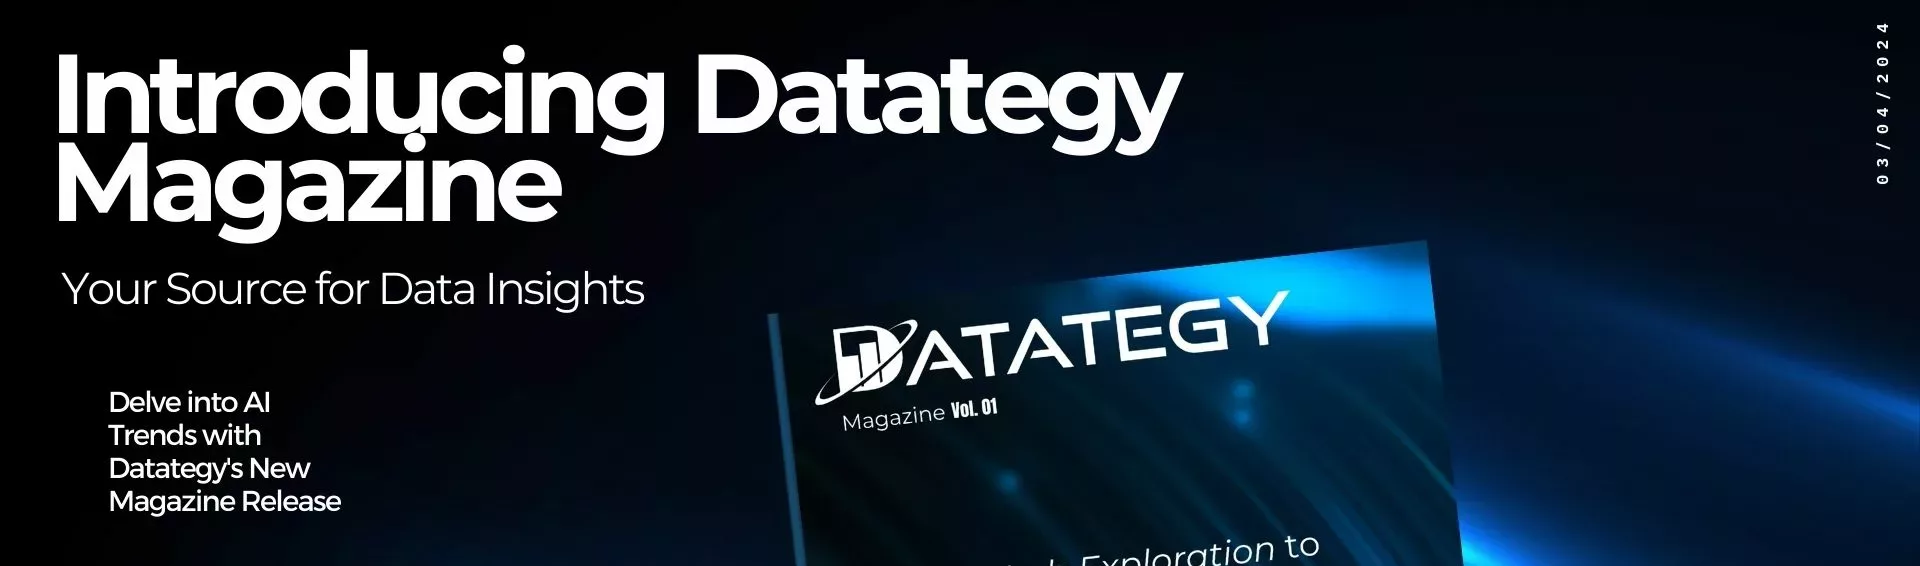 Introducing Datategy Magazine cover